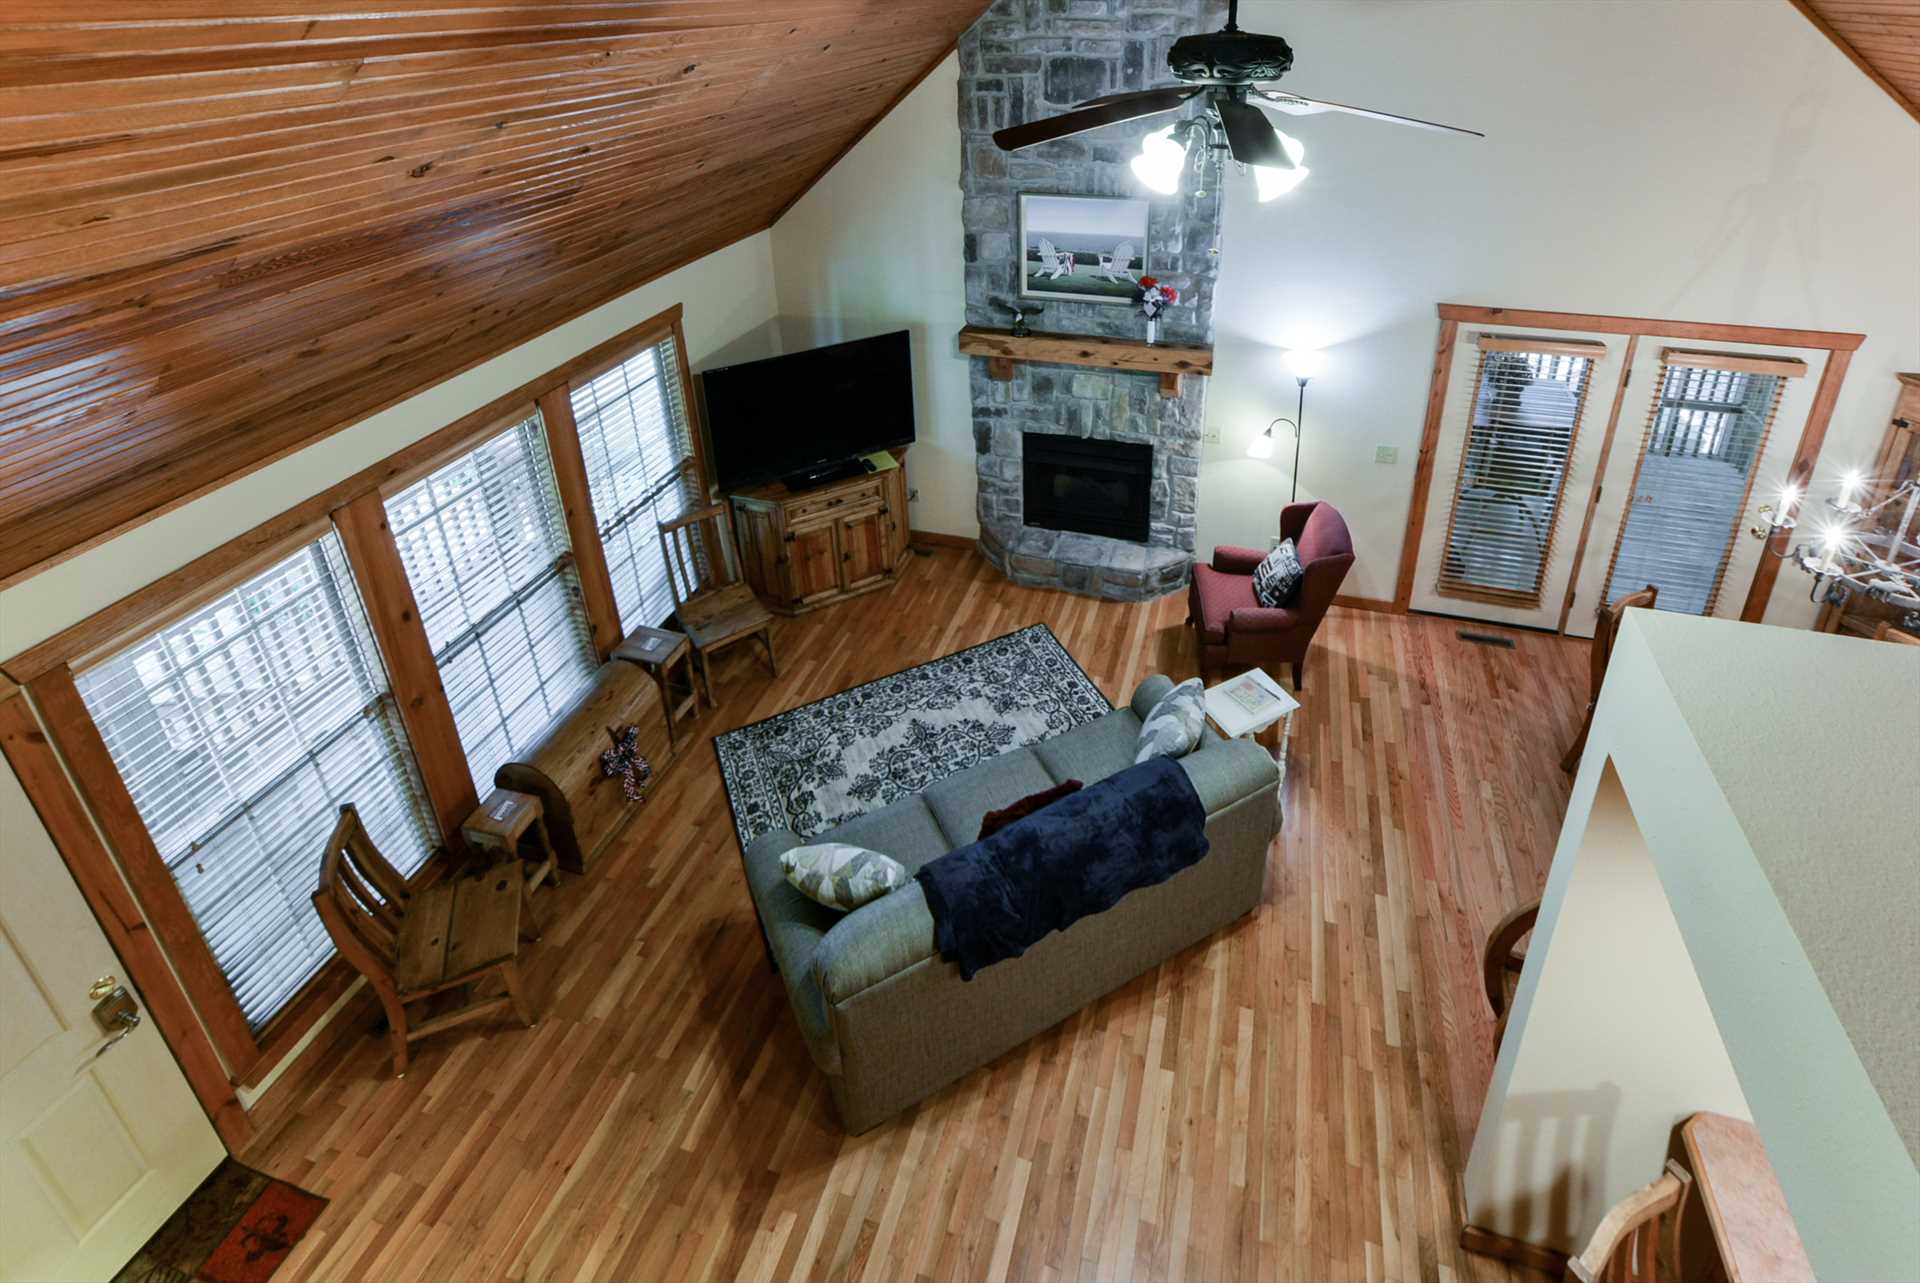 The living area is full of natural light!